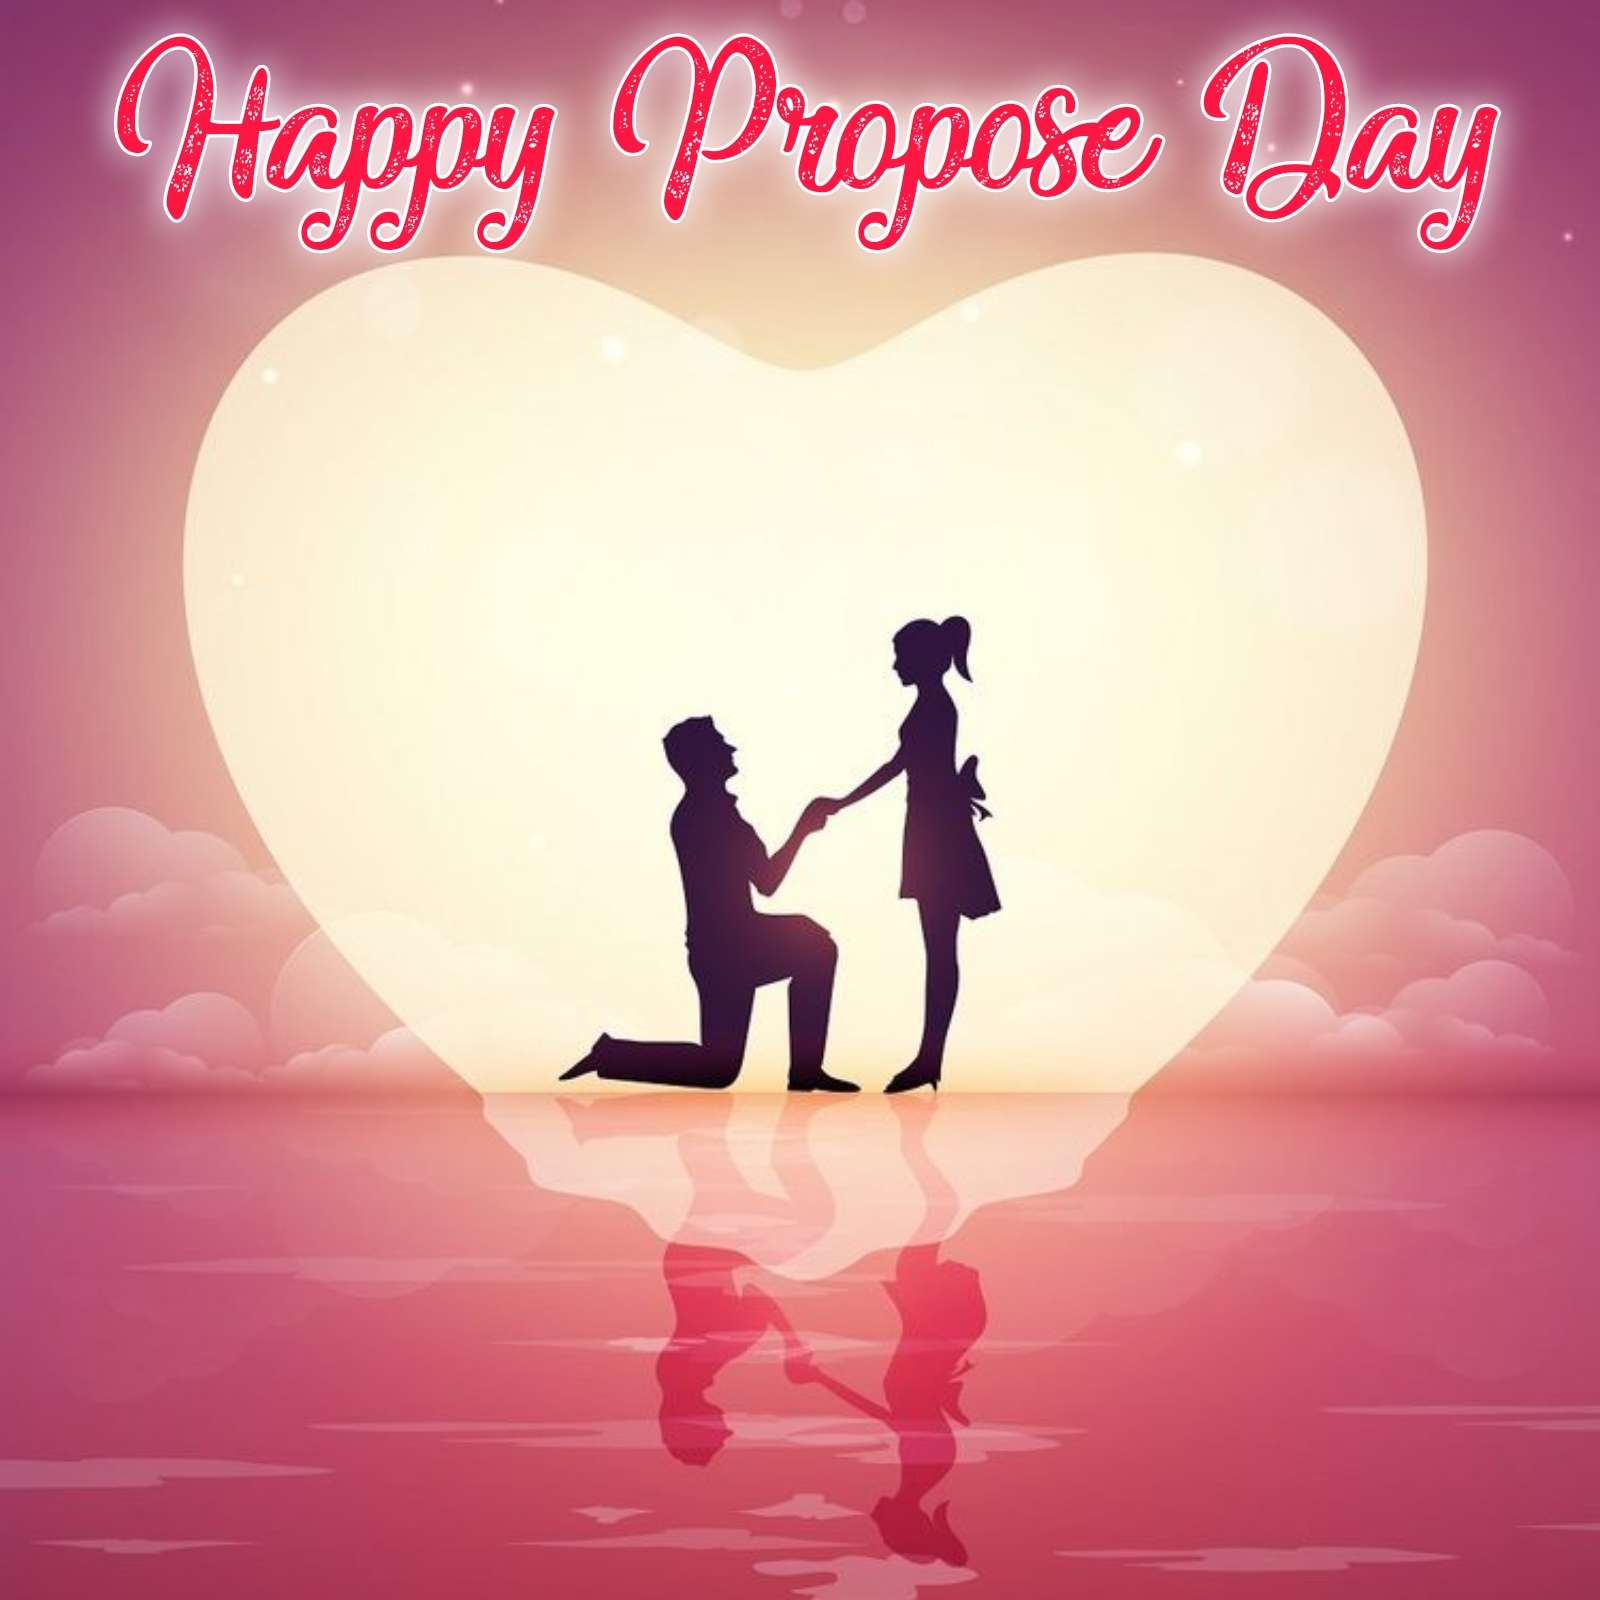 Happy Propose Day Image Download